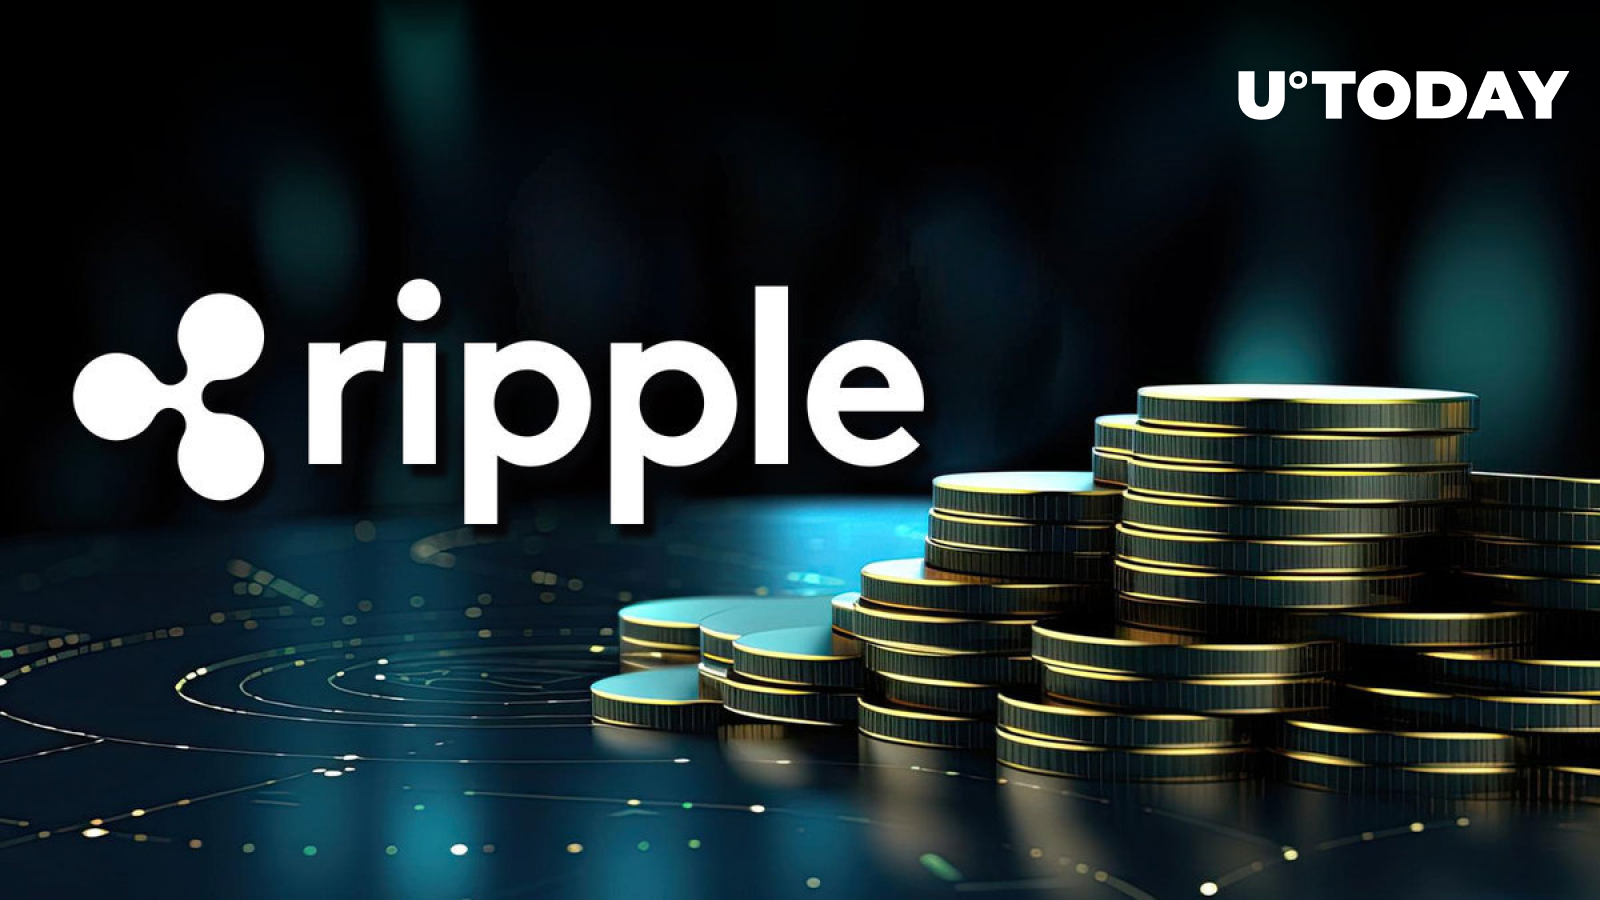 Ripple Officially Enters Hottest Crypto Sector With Major New Partnership